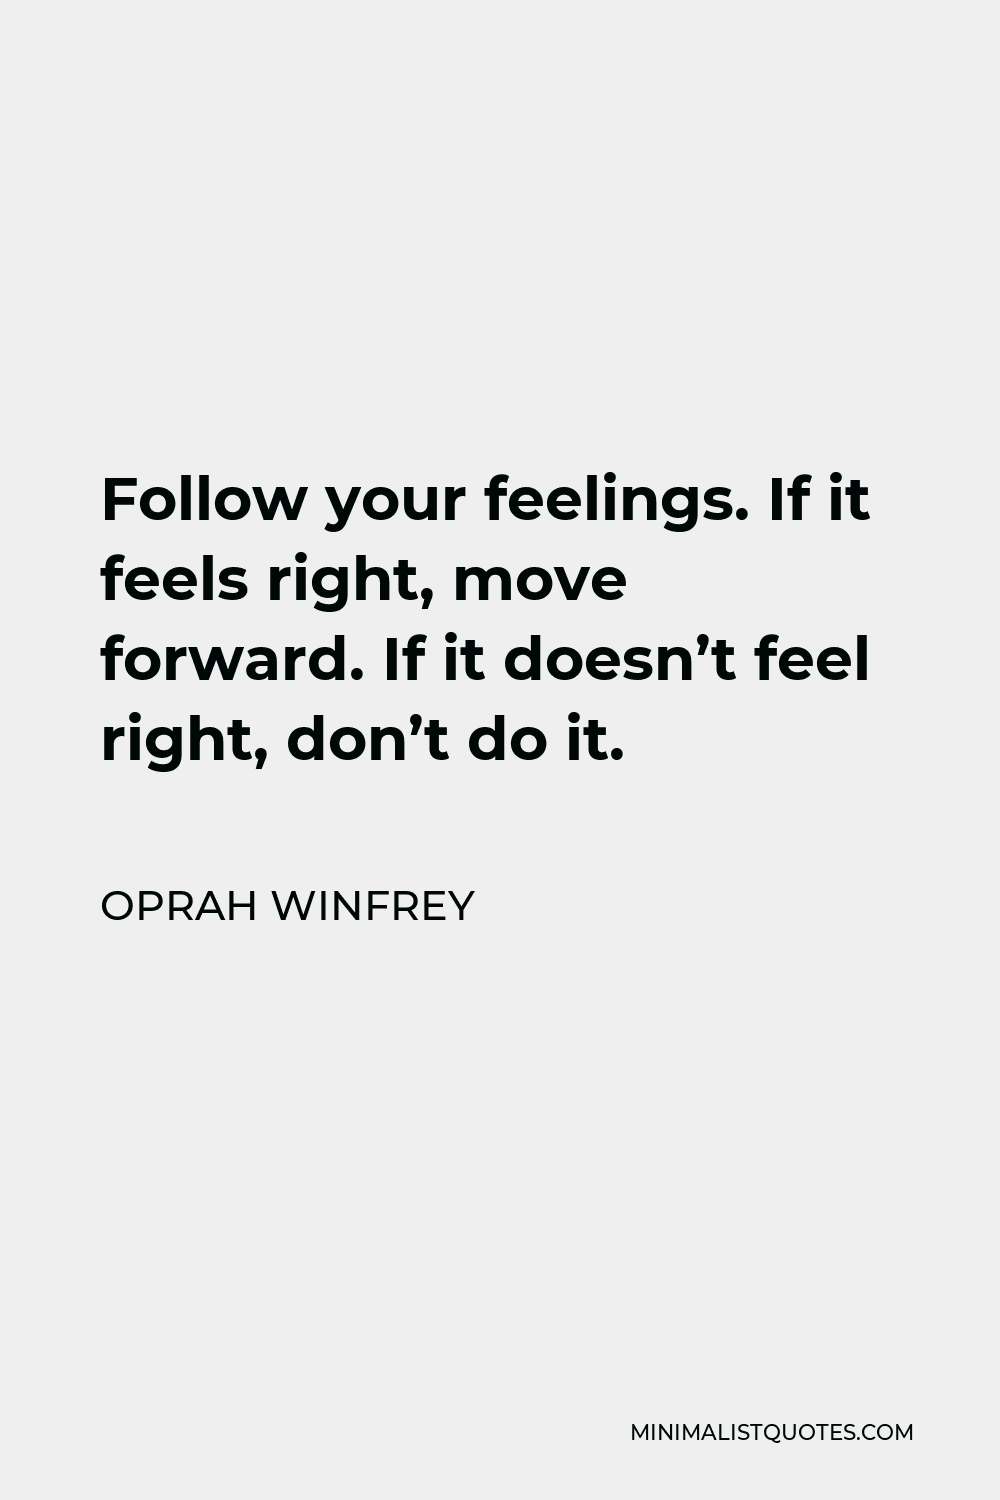 Oprah Winfrey Quote - Follow your feelings. If it feels right, move forward. If it doesn’t feel right, don’t do it.